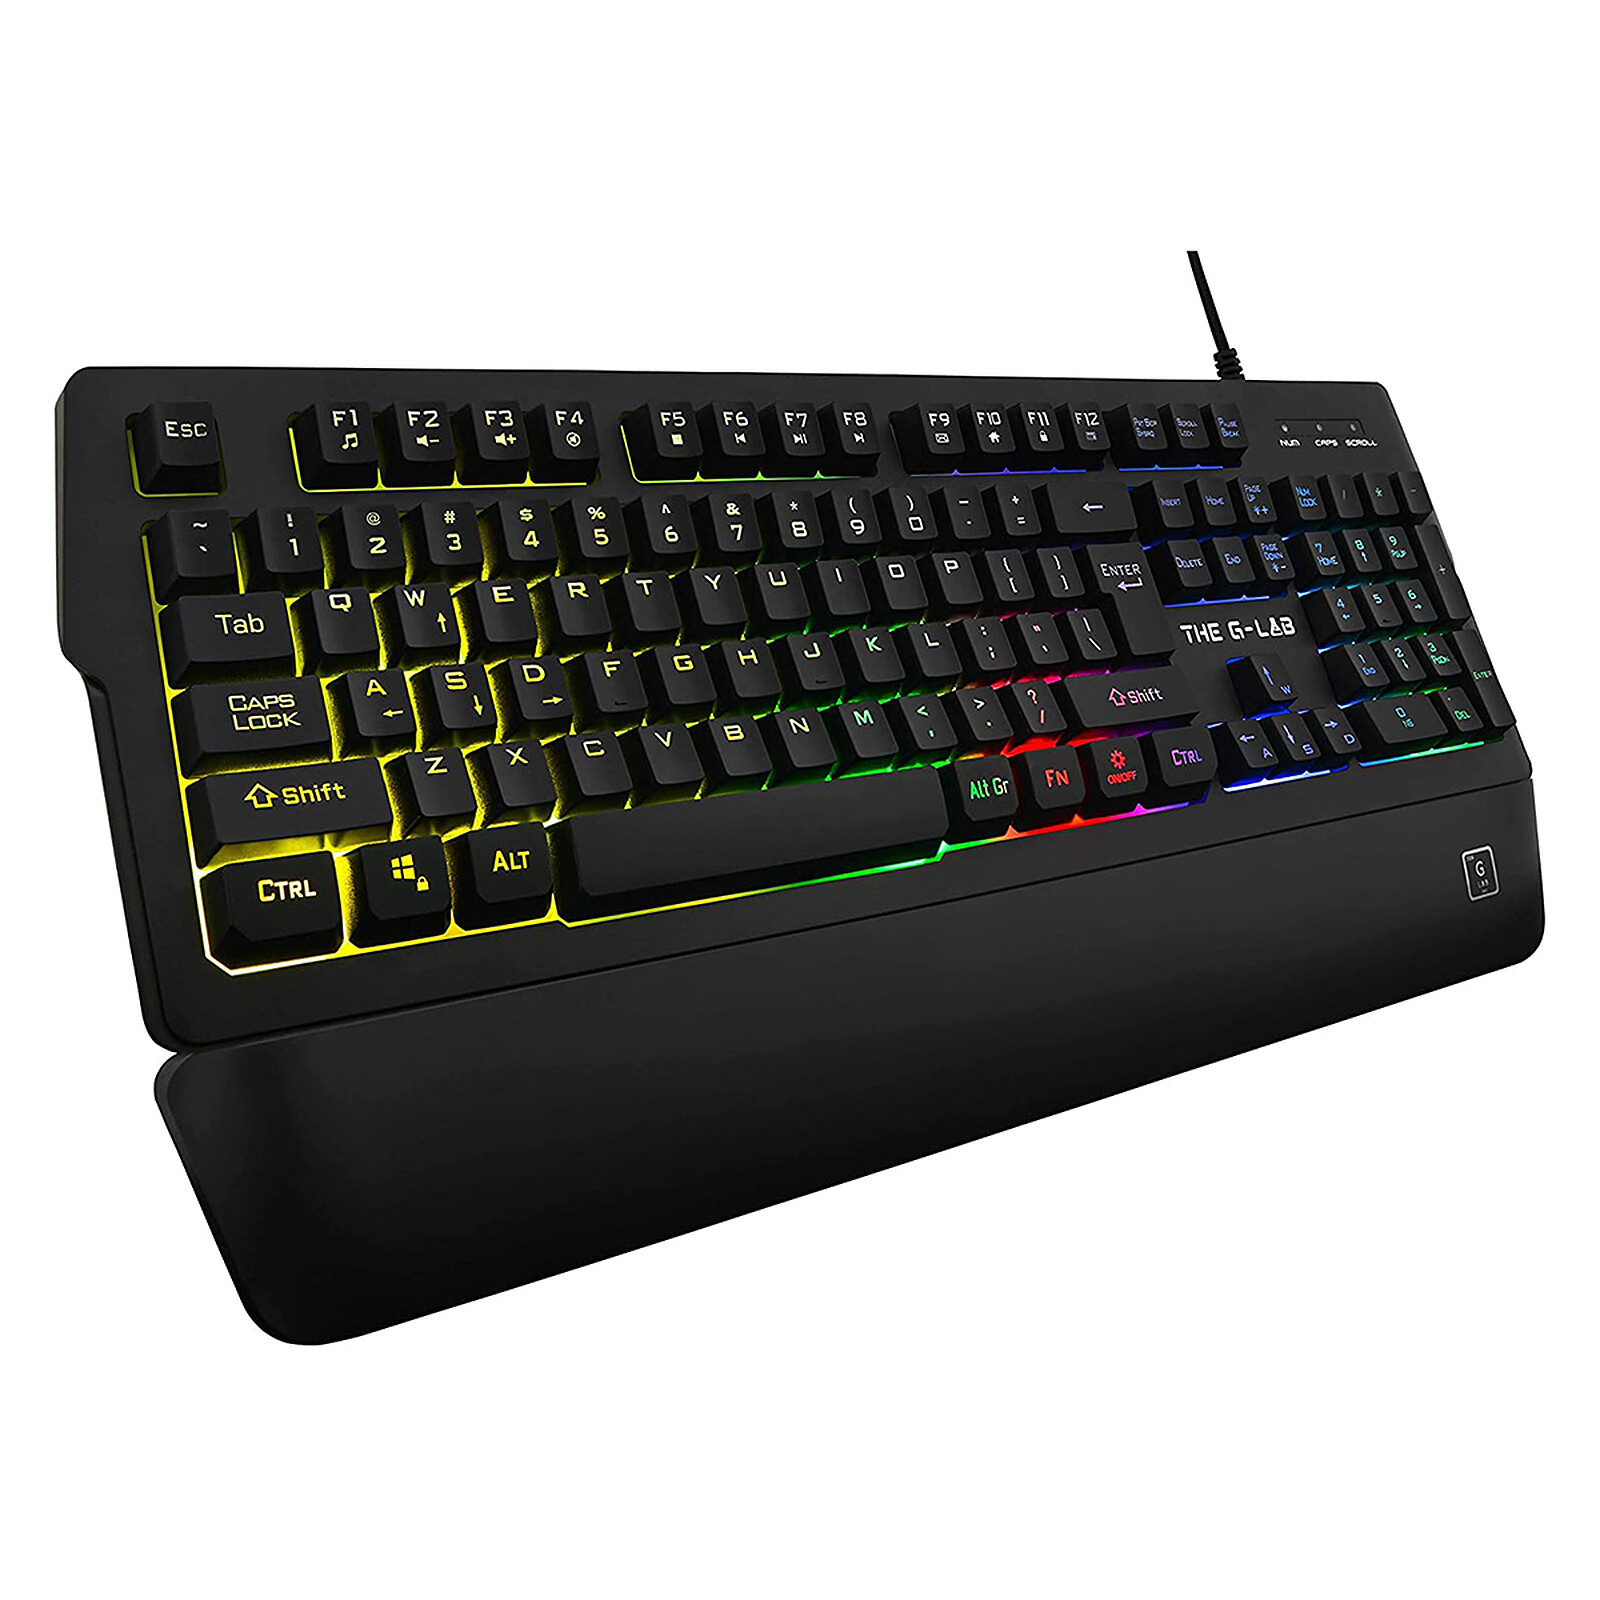 Clavier Gaming Rgb - Repose Poignet - Fr - Azerty - Clavier BUT